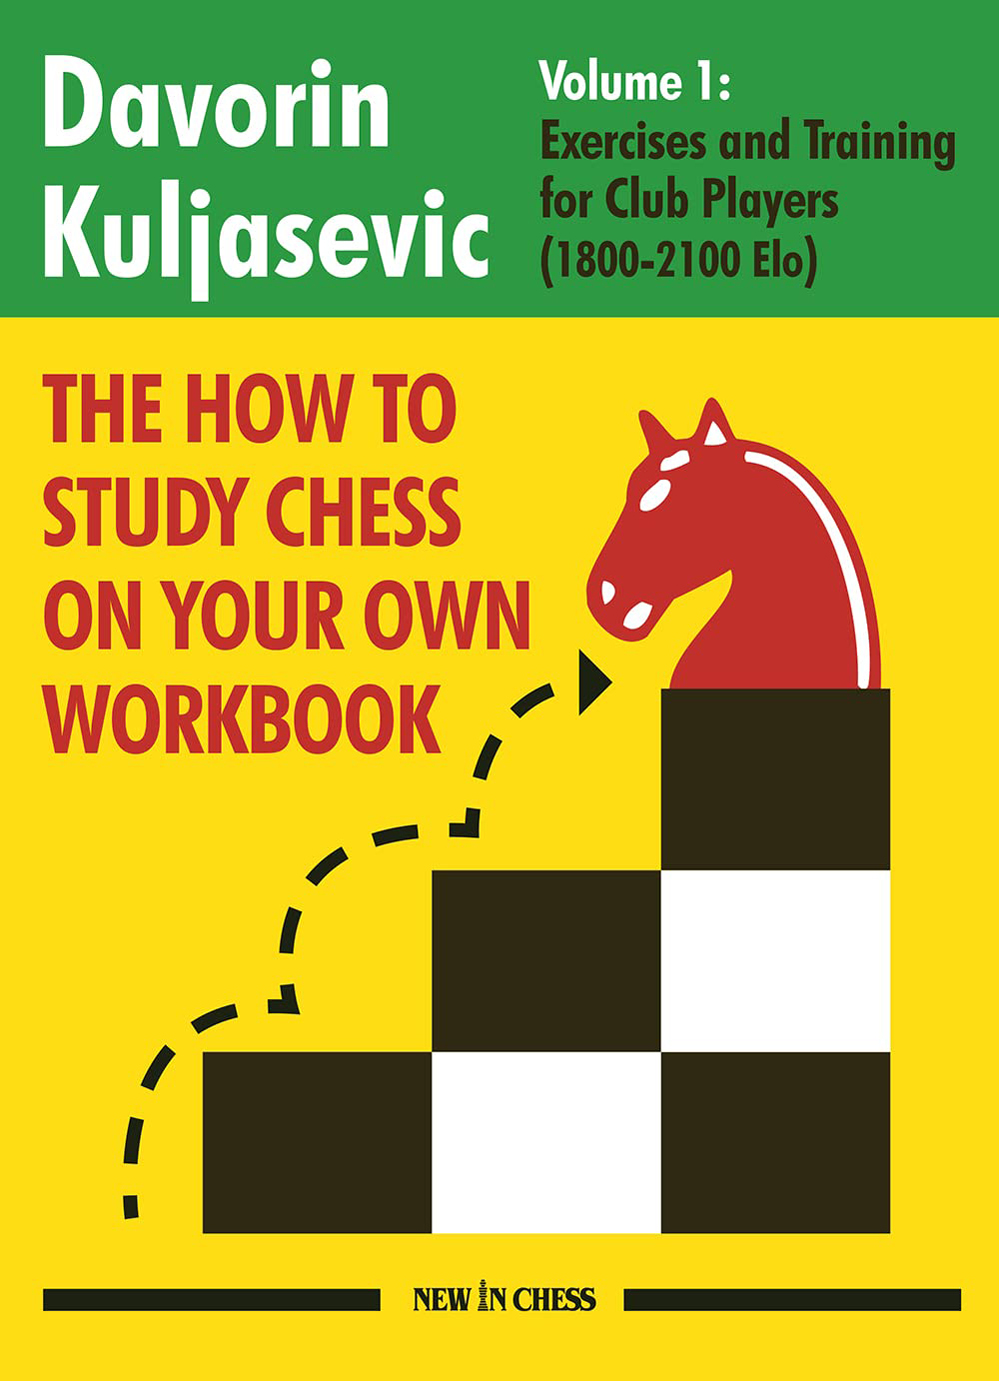 How to Study Chess on Your Own Workbook Vol. 1. 9789493257559